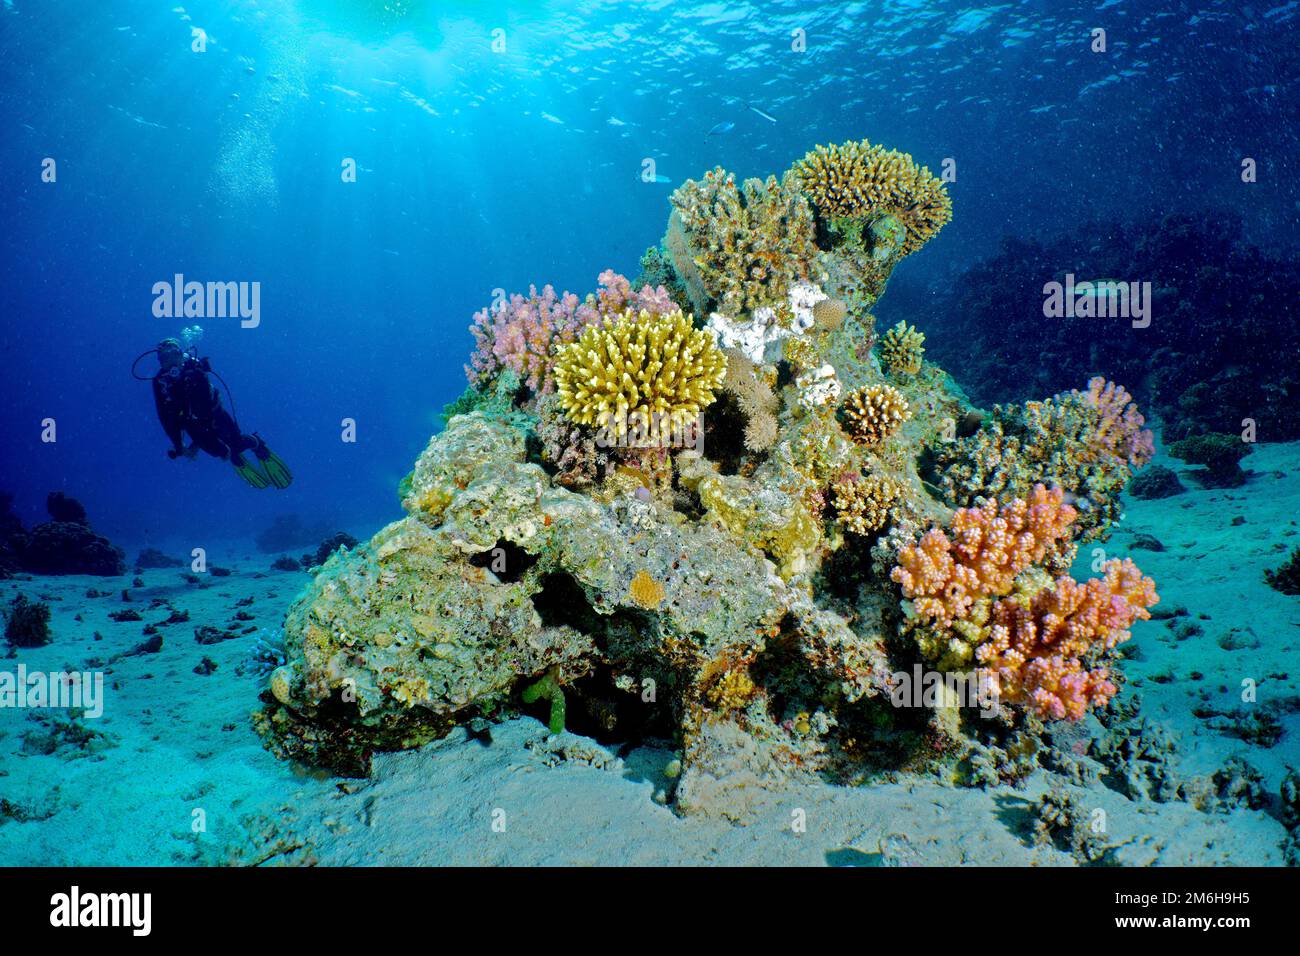 Large coral block with Low Staghorn Coral (Acropora humilis), Raspberry Coral Raspberry Coral (Pocillopora damicornis) and other stony corals. Stock Photo